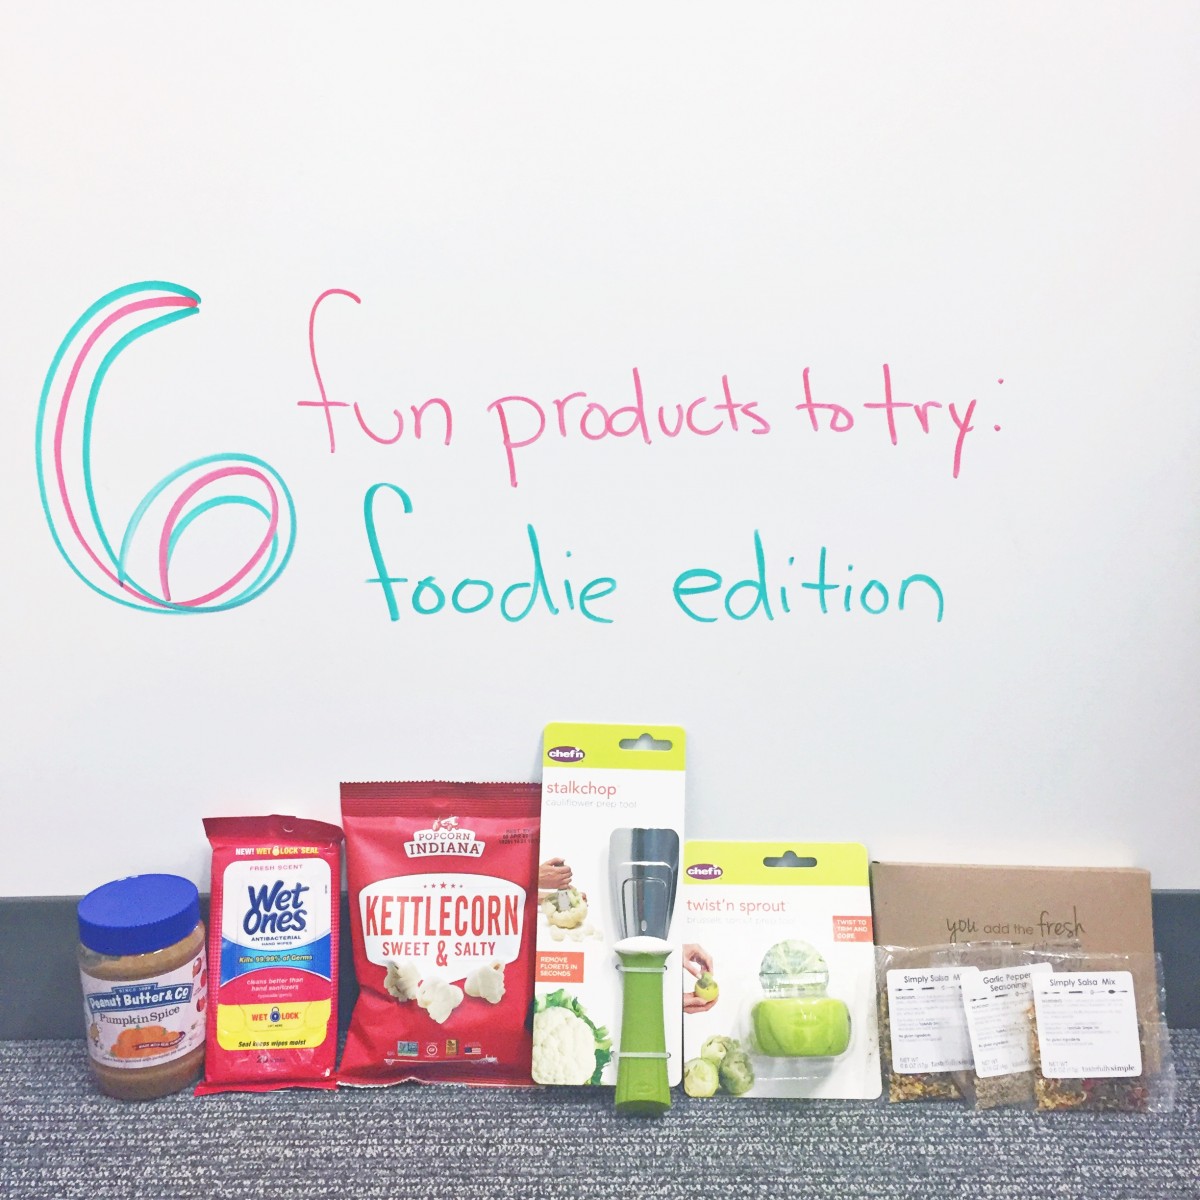 6 fun products to try foodie edition her heartland soul